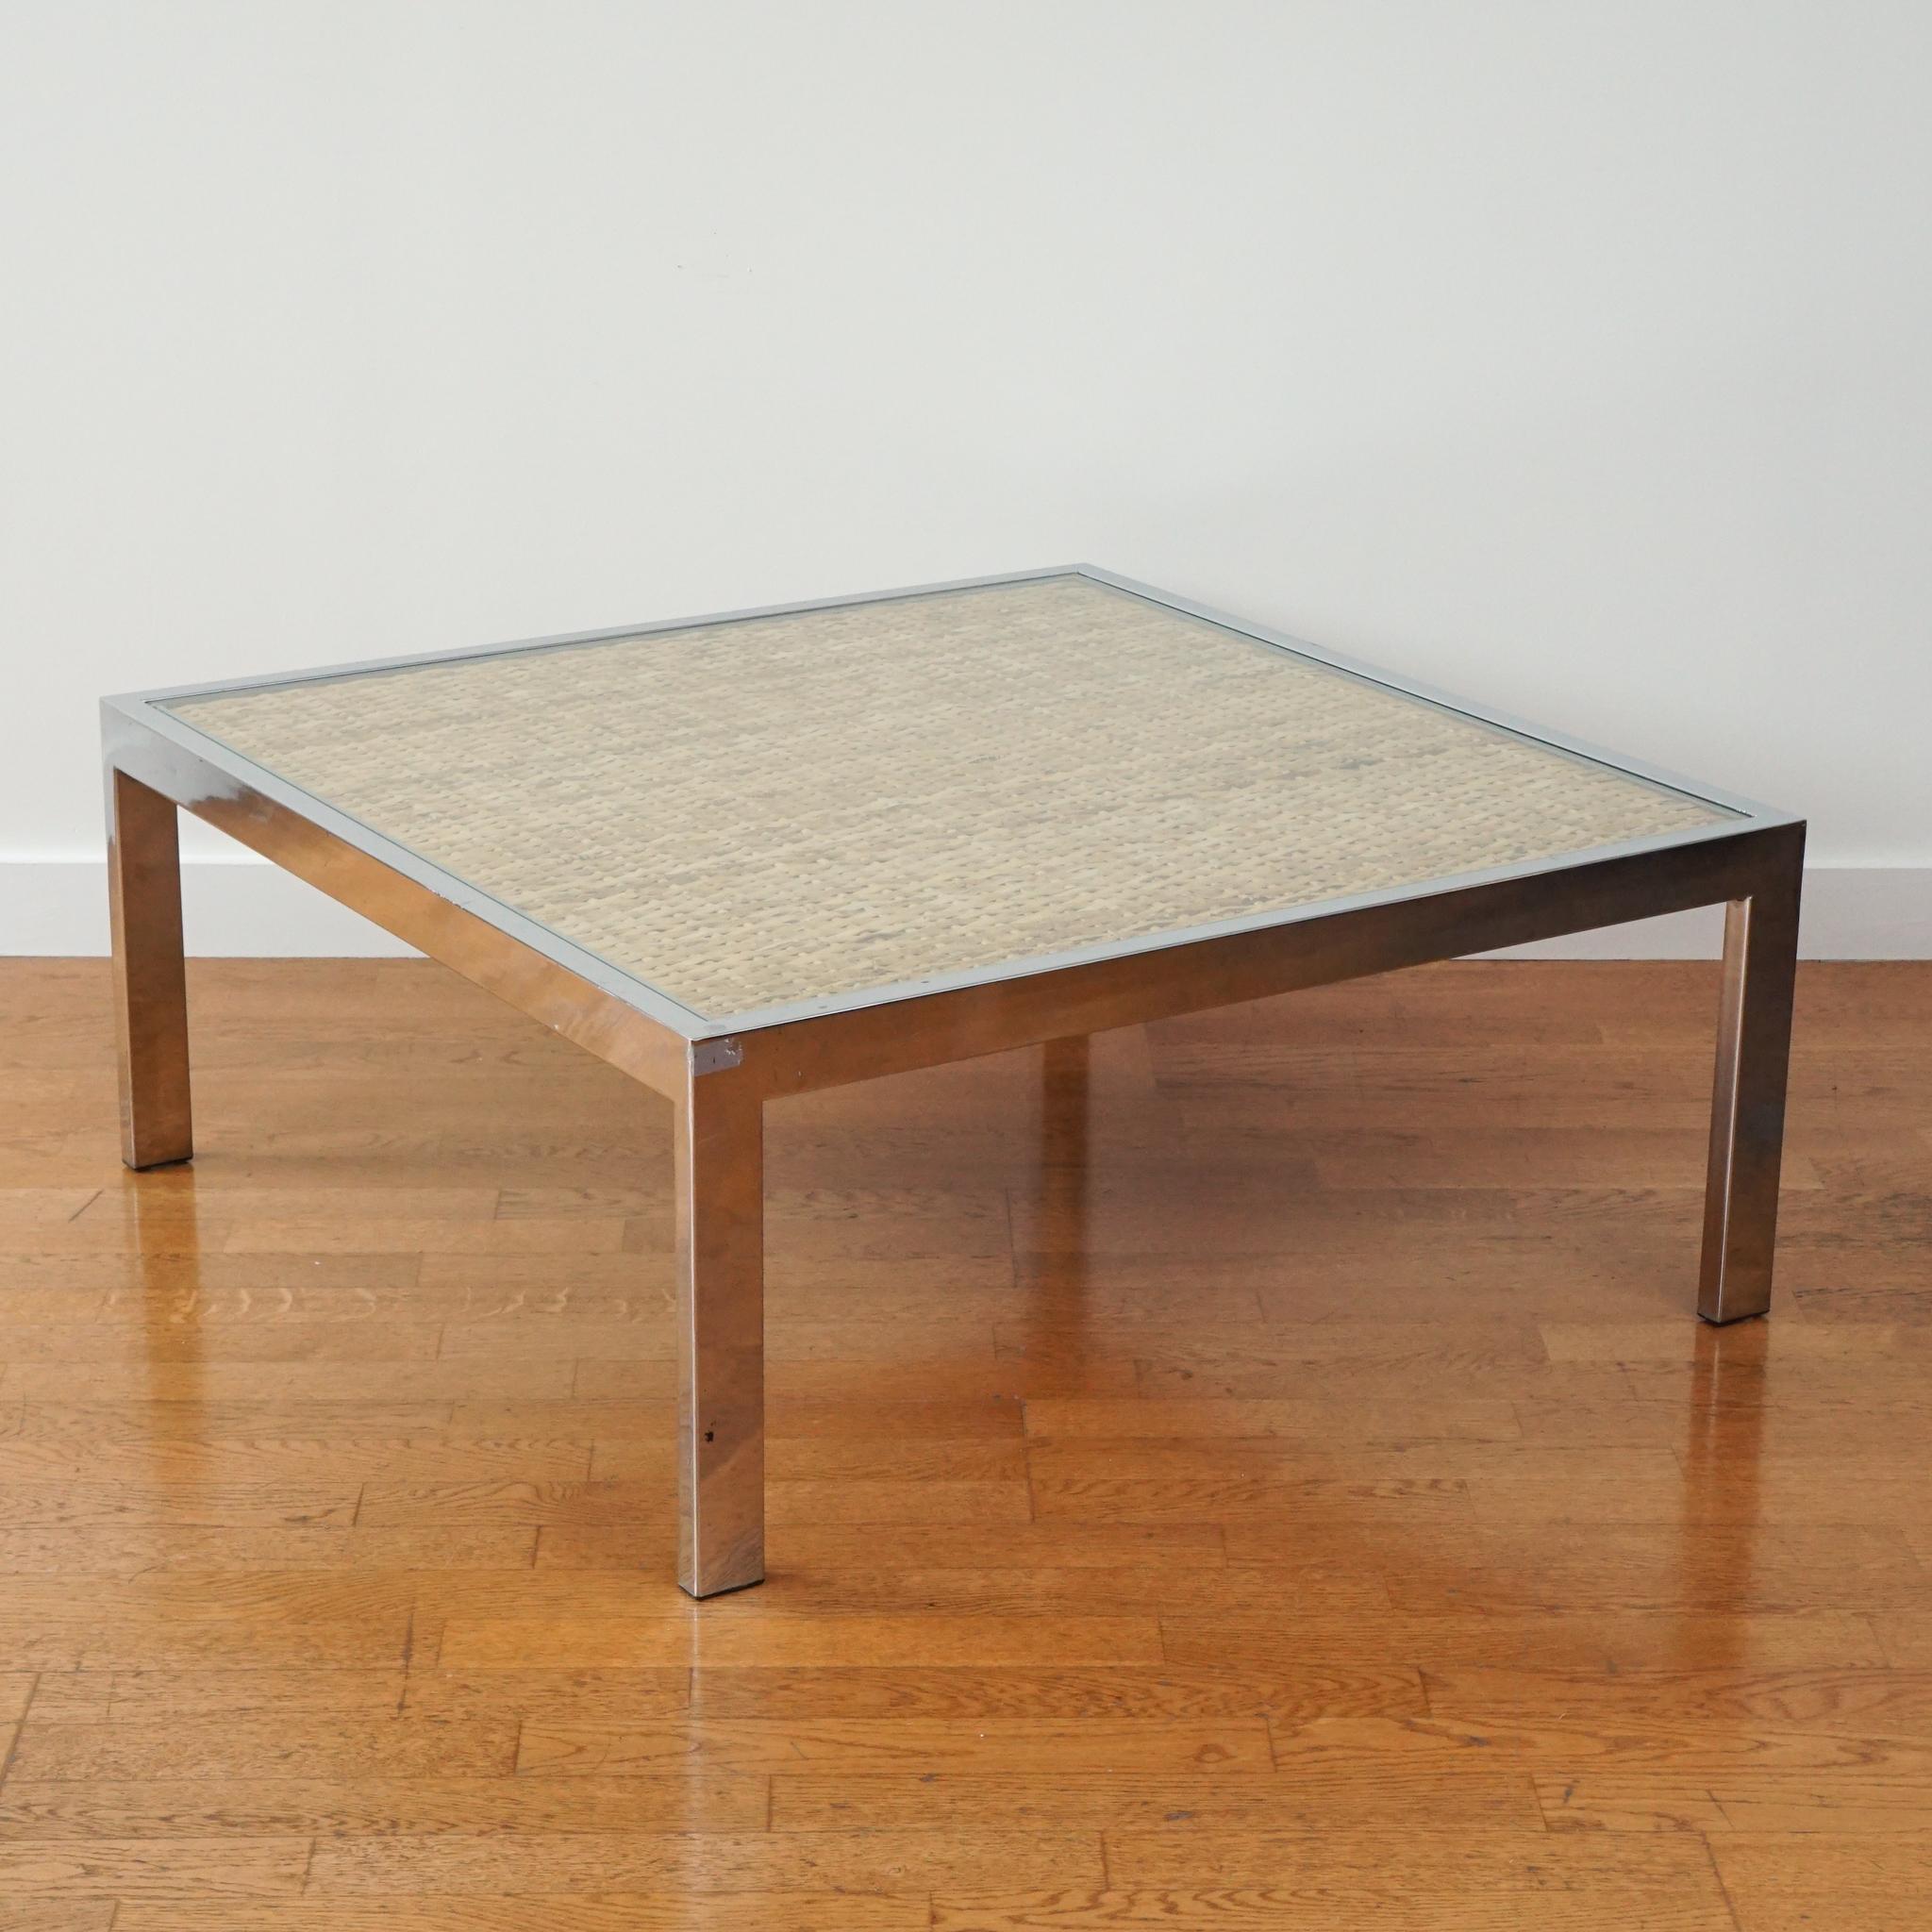 20th Century Square Chrome and Wicker Coffee Table For Sale